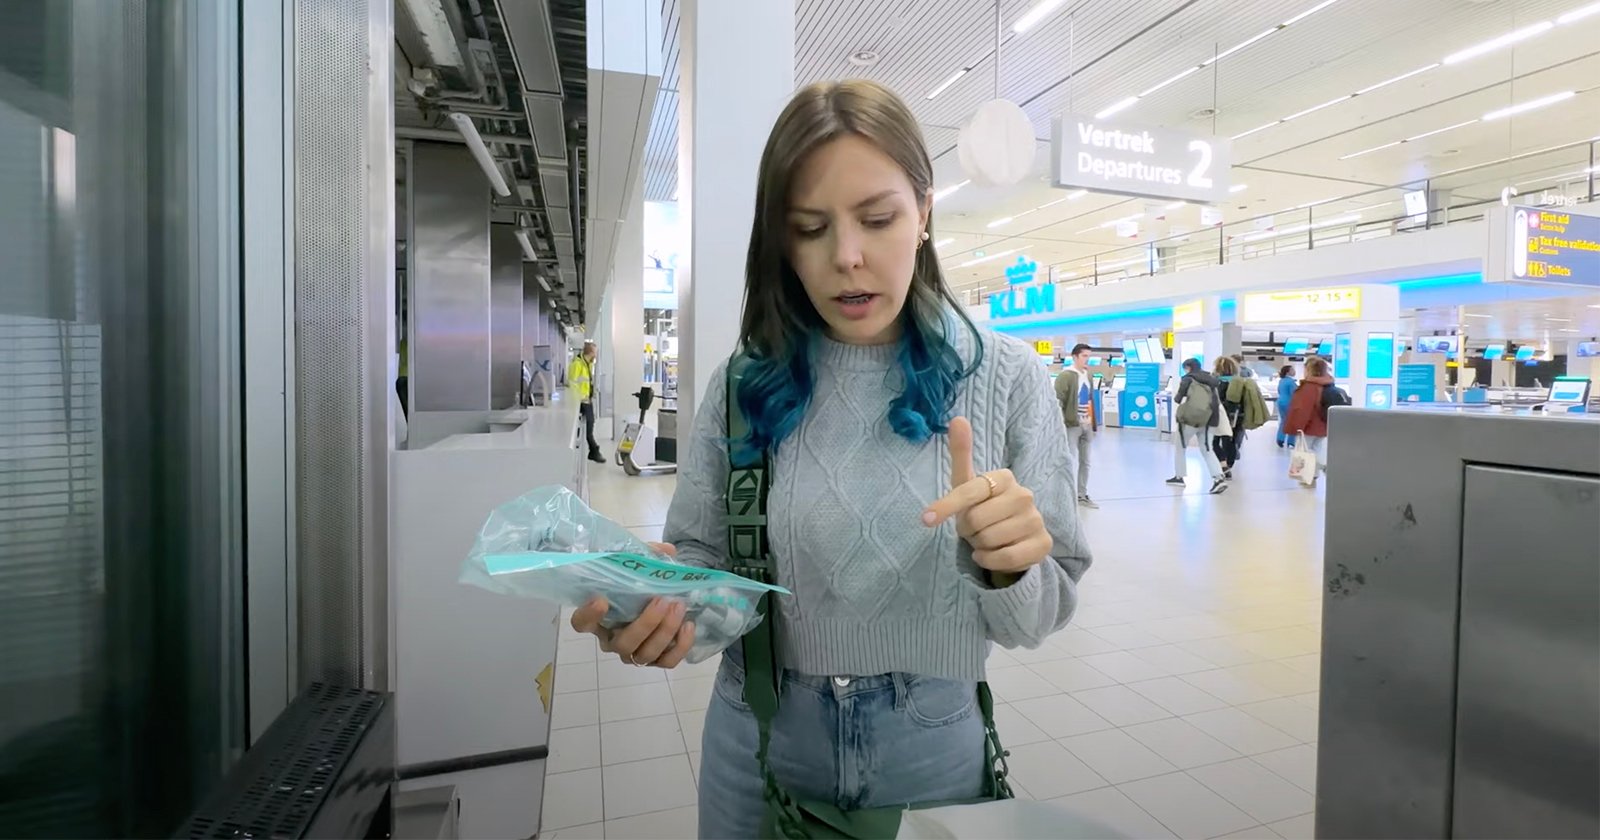 What Happens When Film Goes Through an Airport Security Scanner?